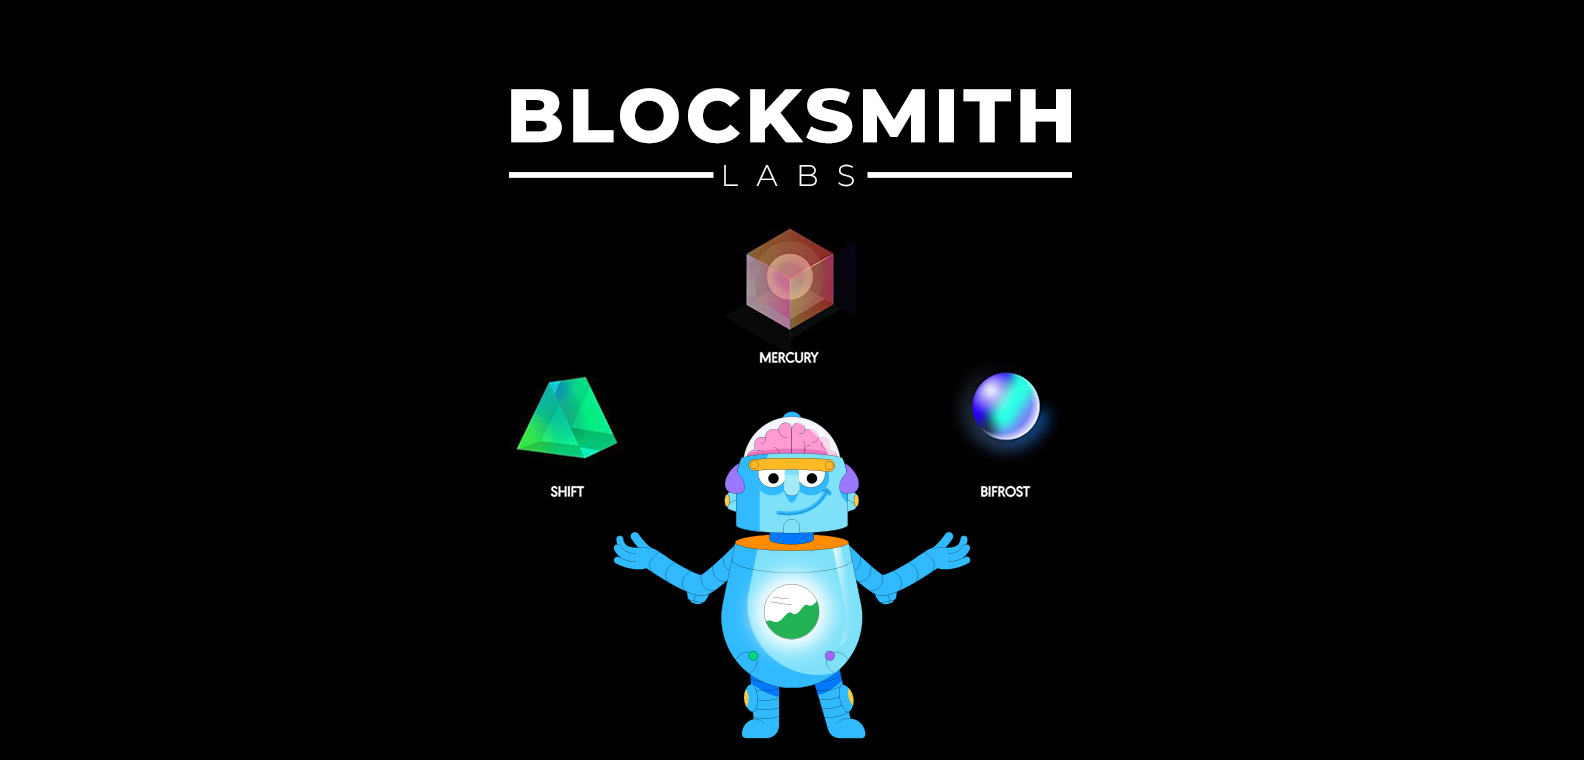 What makes Blocksmith Labs one of the safest investments in this SOL NFT market correction?